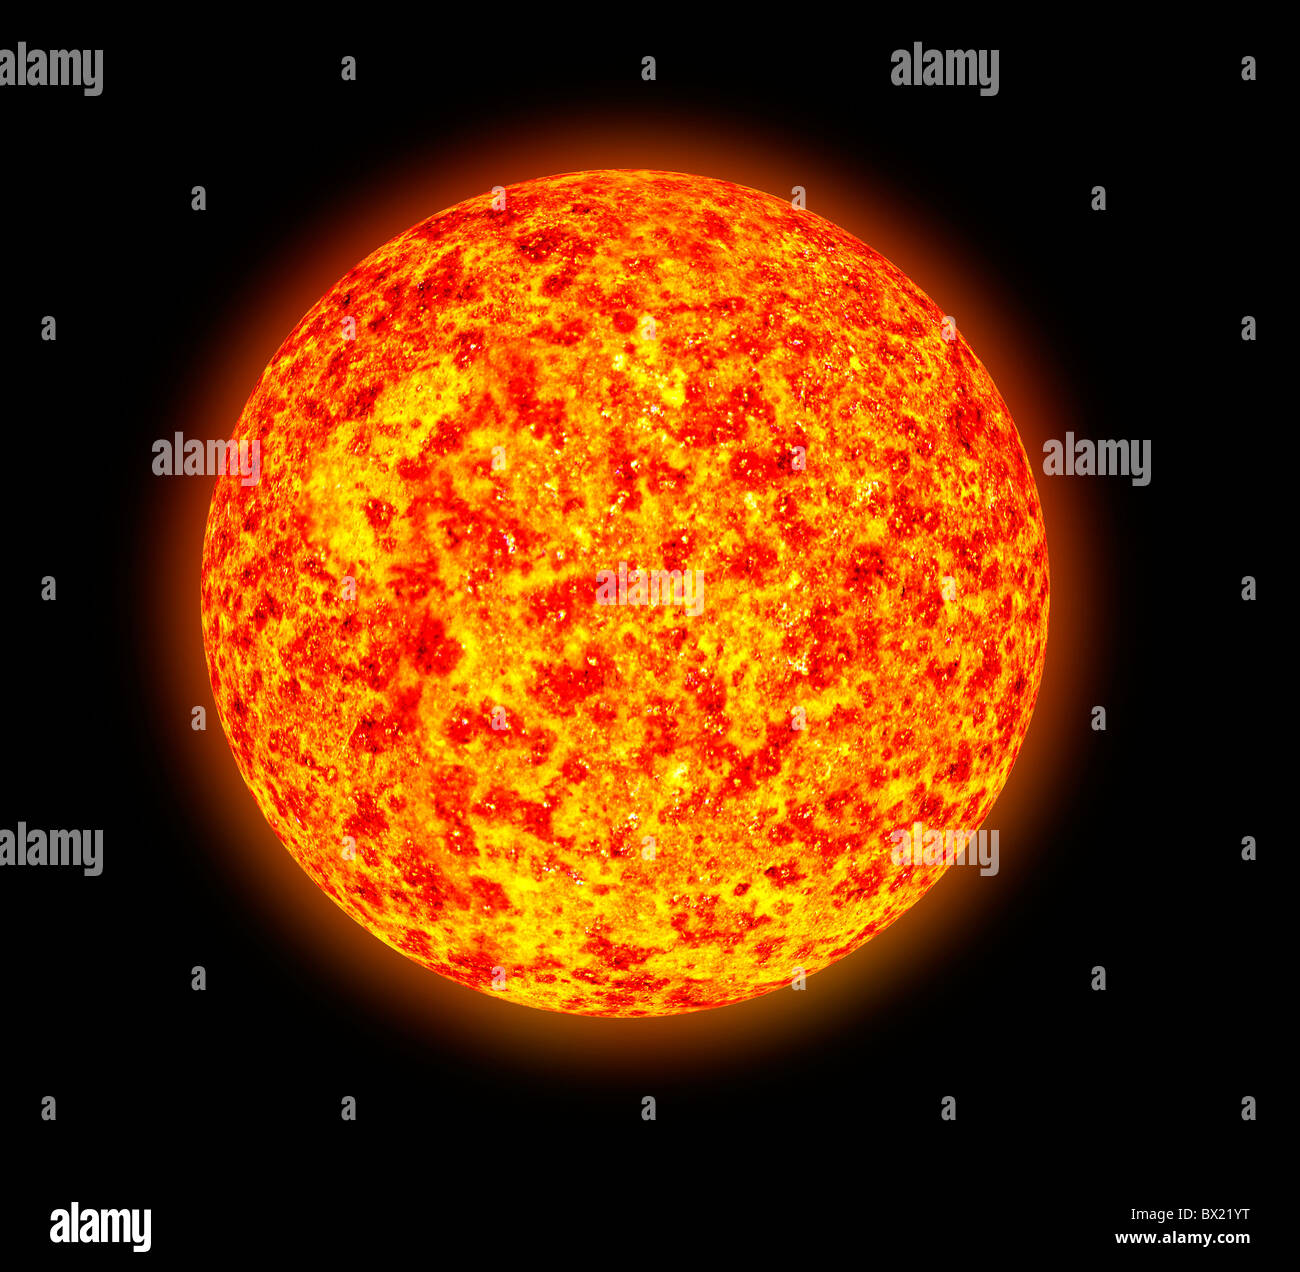 Illustration of sunspot activity as one might see it through a spectroscope Square Stock Photo